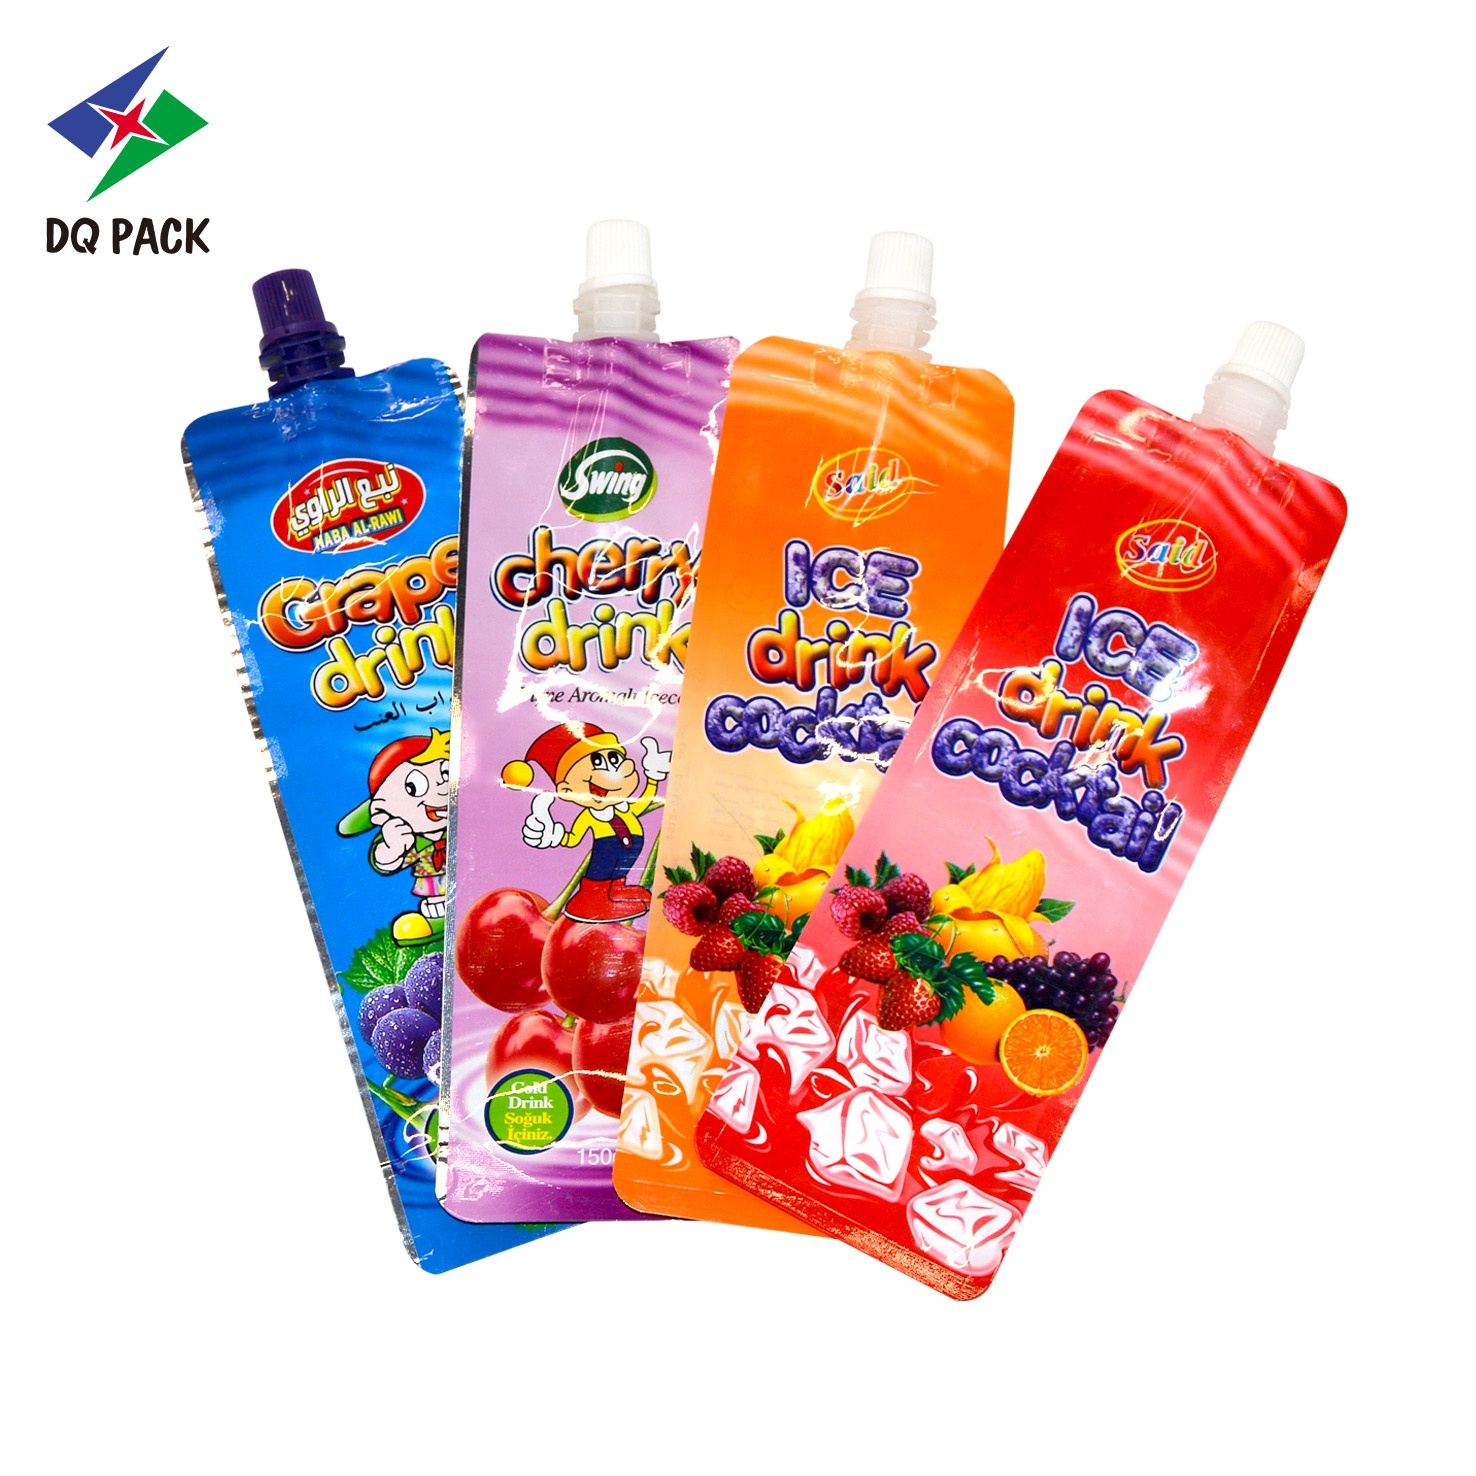 DQ PACK Custom Printed 150ml Juice Packaging Bag VMPET Stand Up Spout Pouch Fruit Packing Plastic Bag